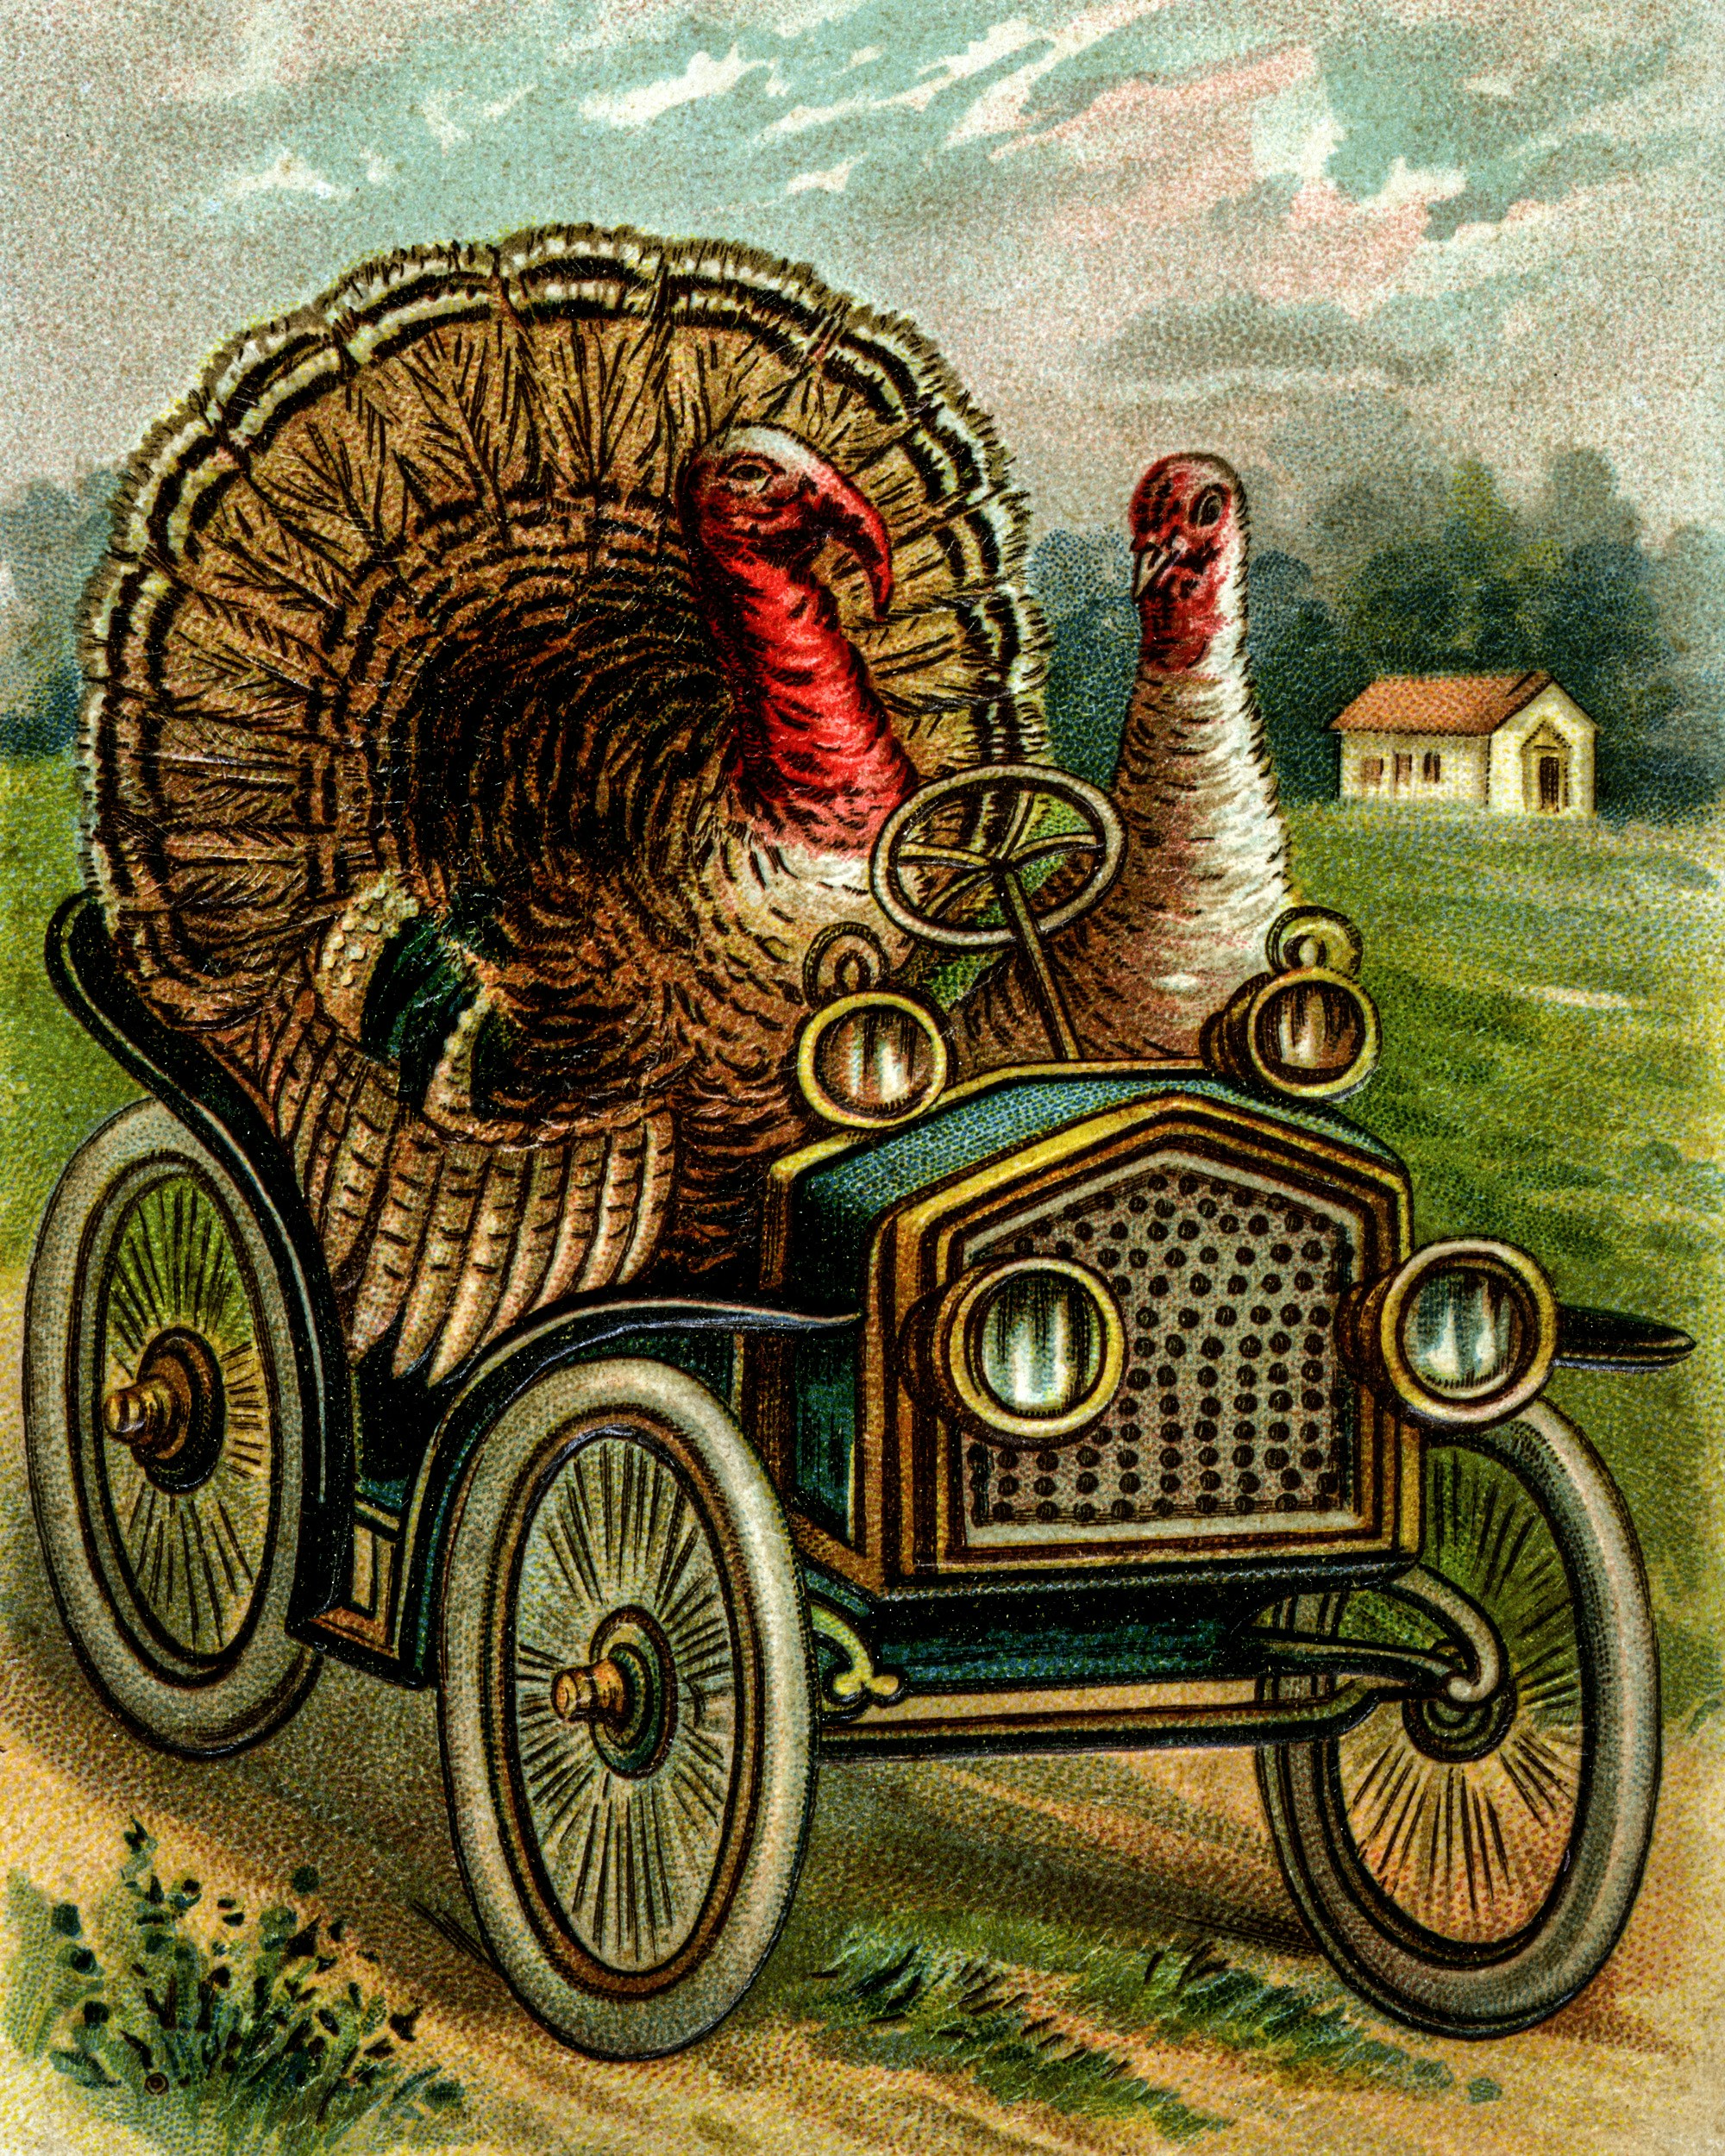 UNITED STATES - CIRCA 1900:  Two turkeys out for a Sunday drive, unlikely! It is probable that these guys know what's coming and are leaving town in their classic automobile. The sender of the vintage postcard is obviously the one conveying wished for the Thanksgiving feast because the turkey probably will not enjoy the holiday as much.  (Photo by Buyenlarge/Getty Images)